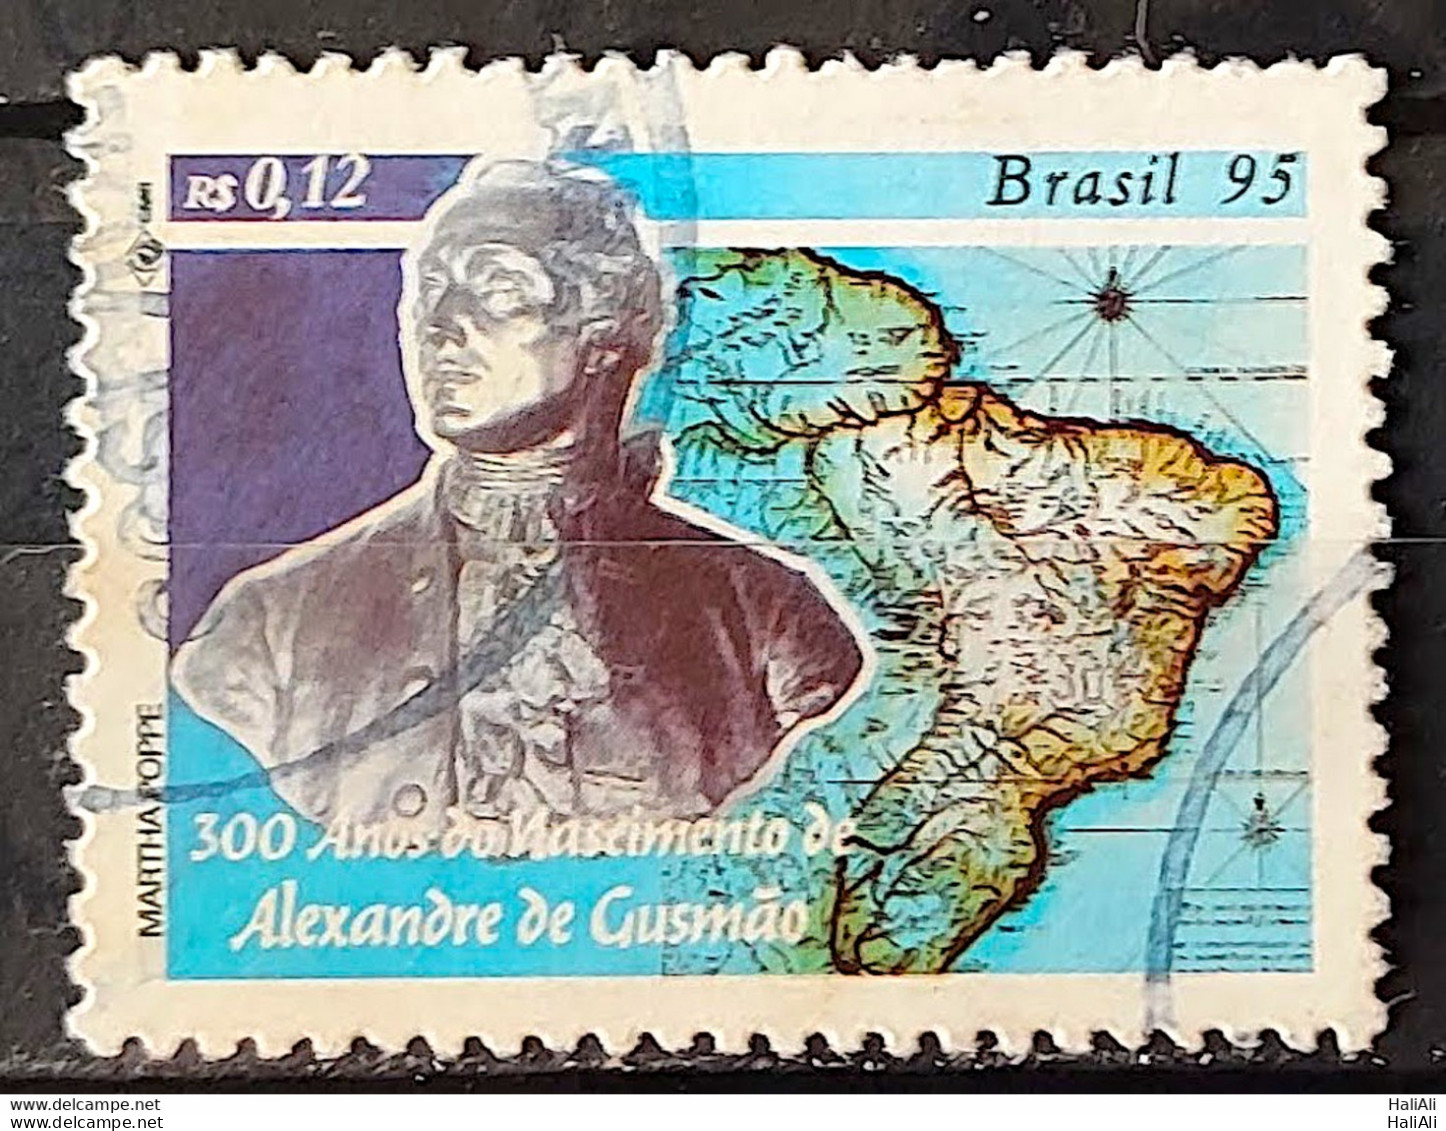 C 1938 Brazil Stamp Alexandre De Gusmao Diplomacy 1995 Circulated 1 - Used Stamps